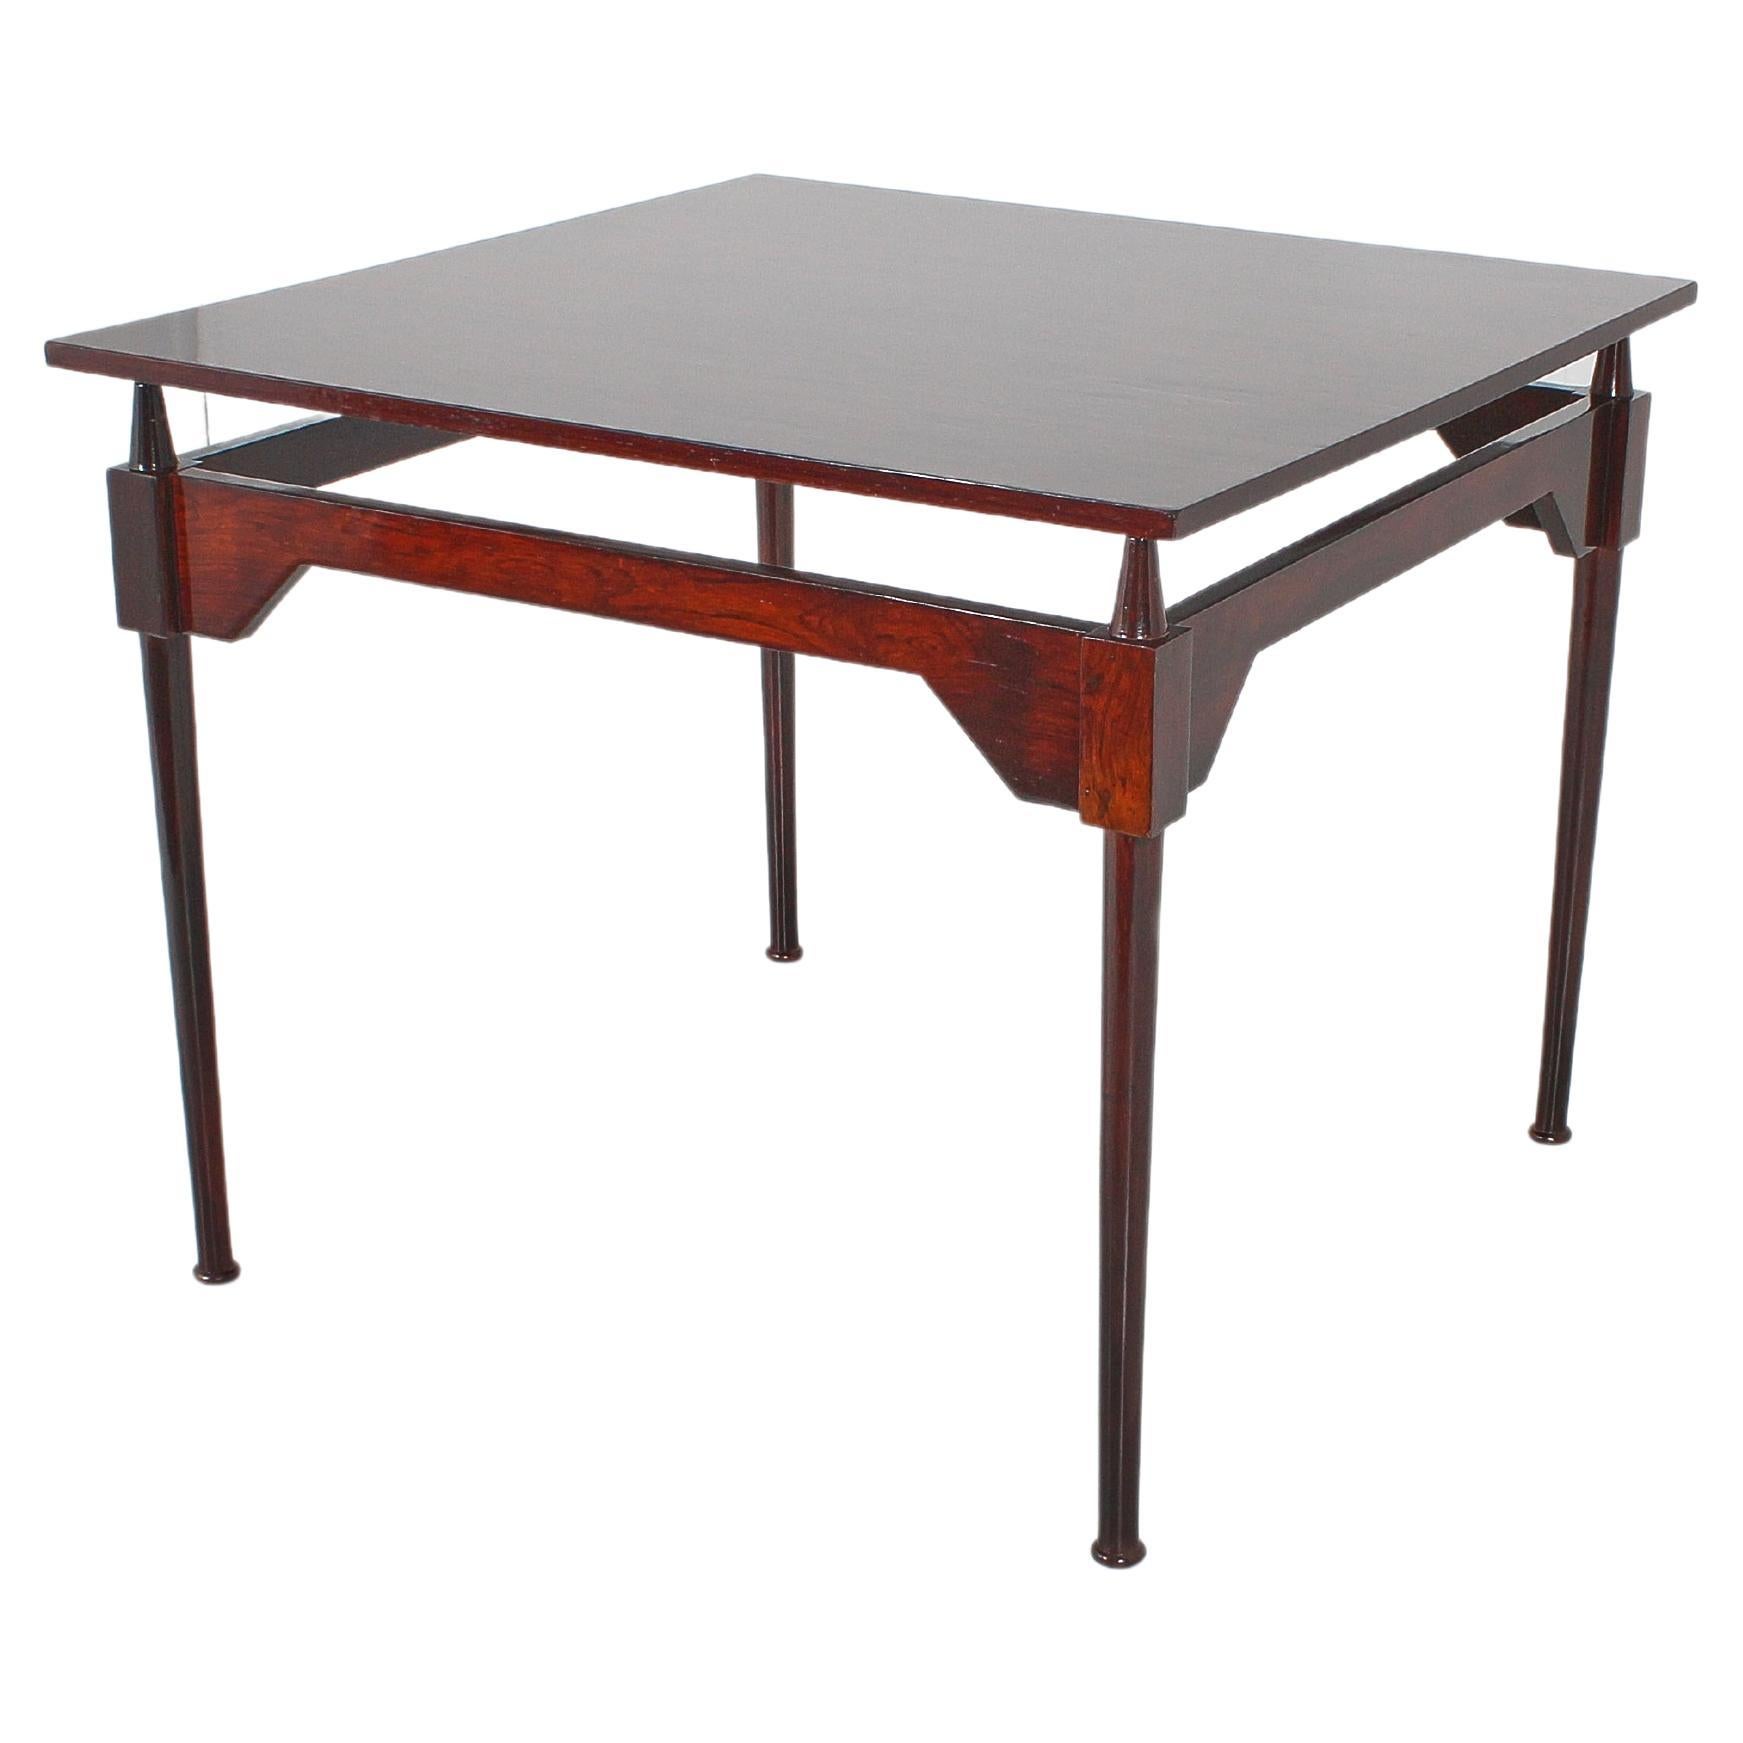 Excellent square table mod. TL3 by Franco Albini for Poggi Pavia, in 1951, with solid wood and metal structure. Restored.



Wear consistent with age and use.

References:
- R. Aloi, 